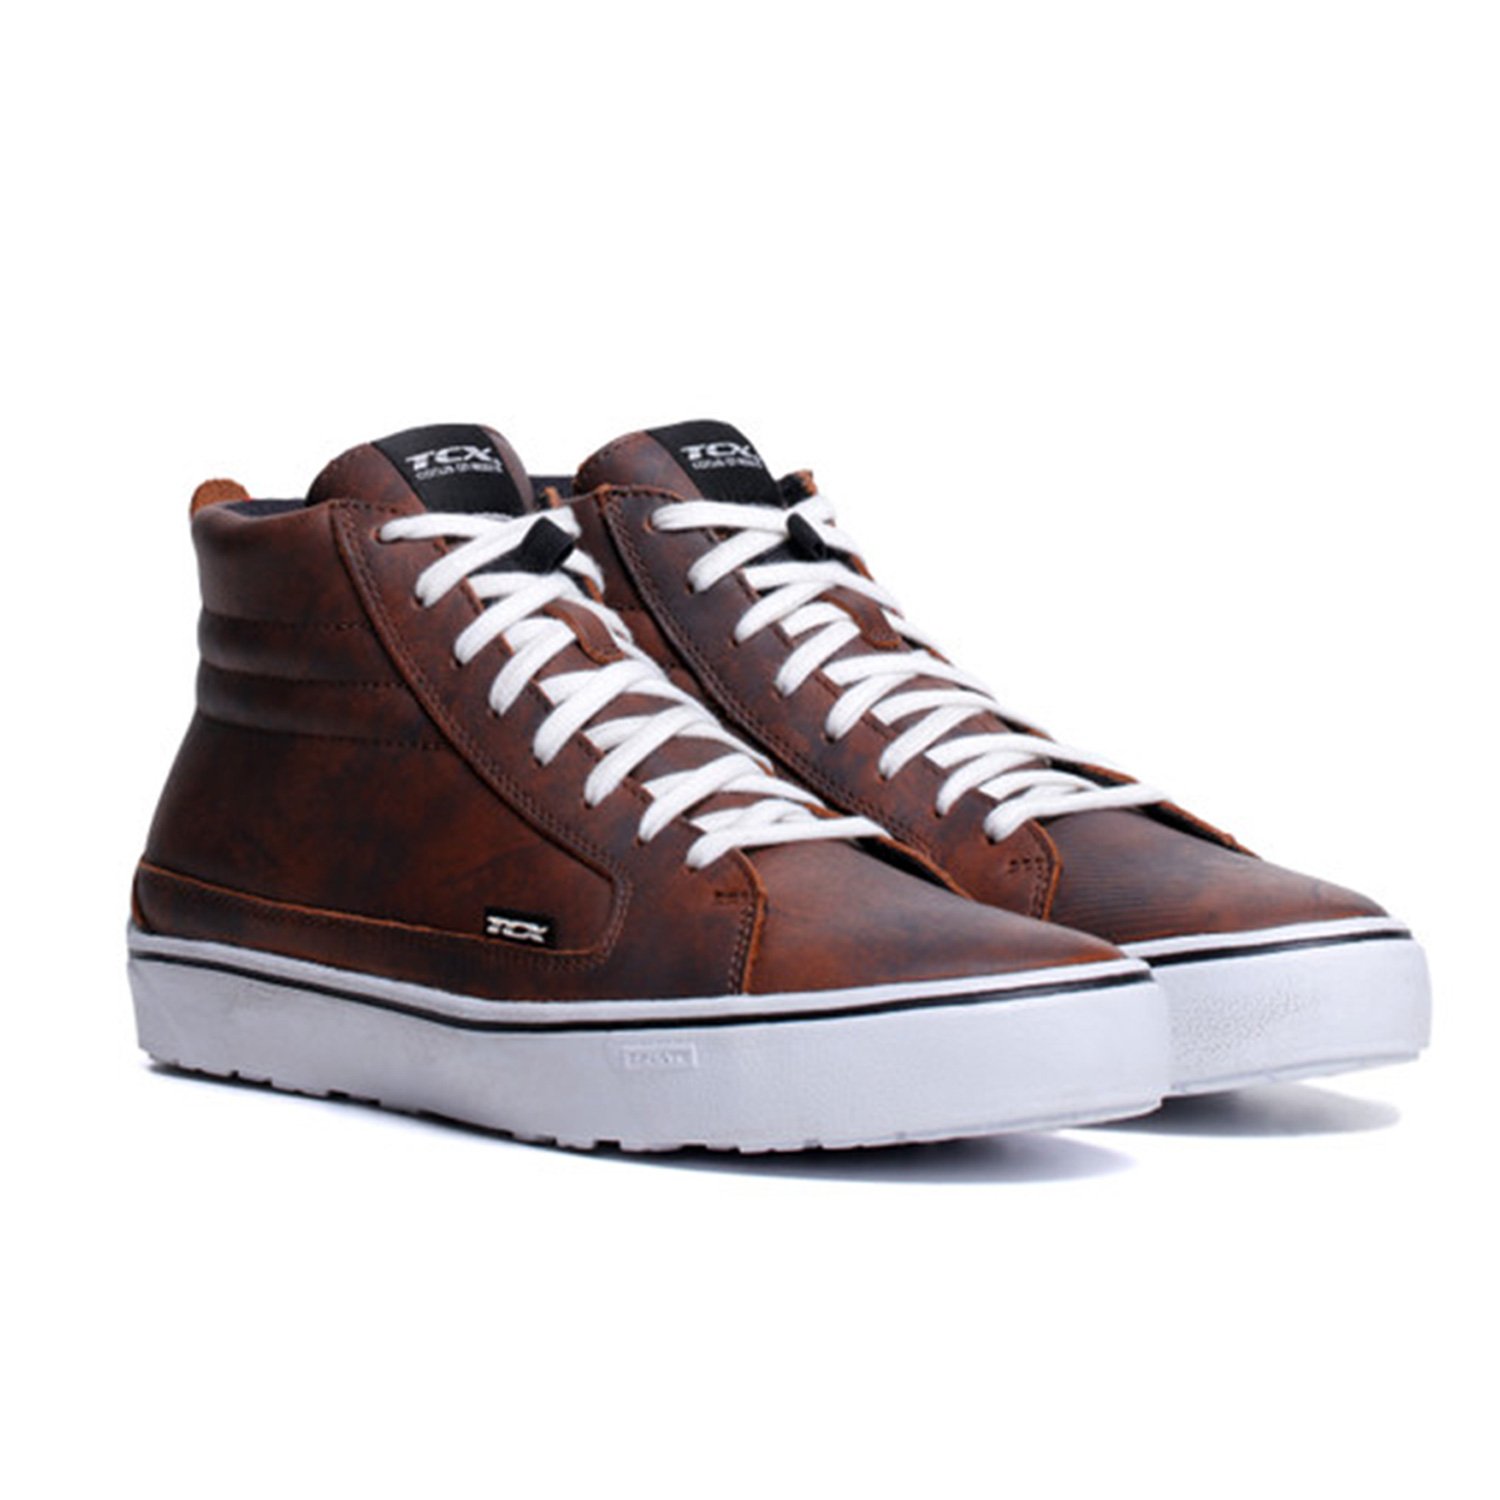 Image of TCX Street 3 WP Marron Blanc Chaussures Taille 40